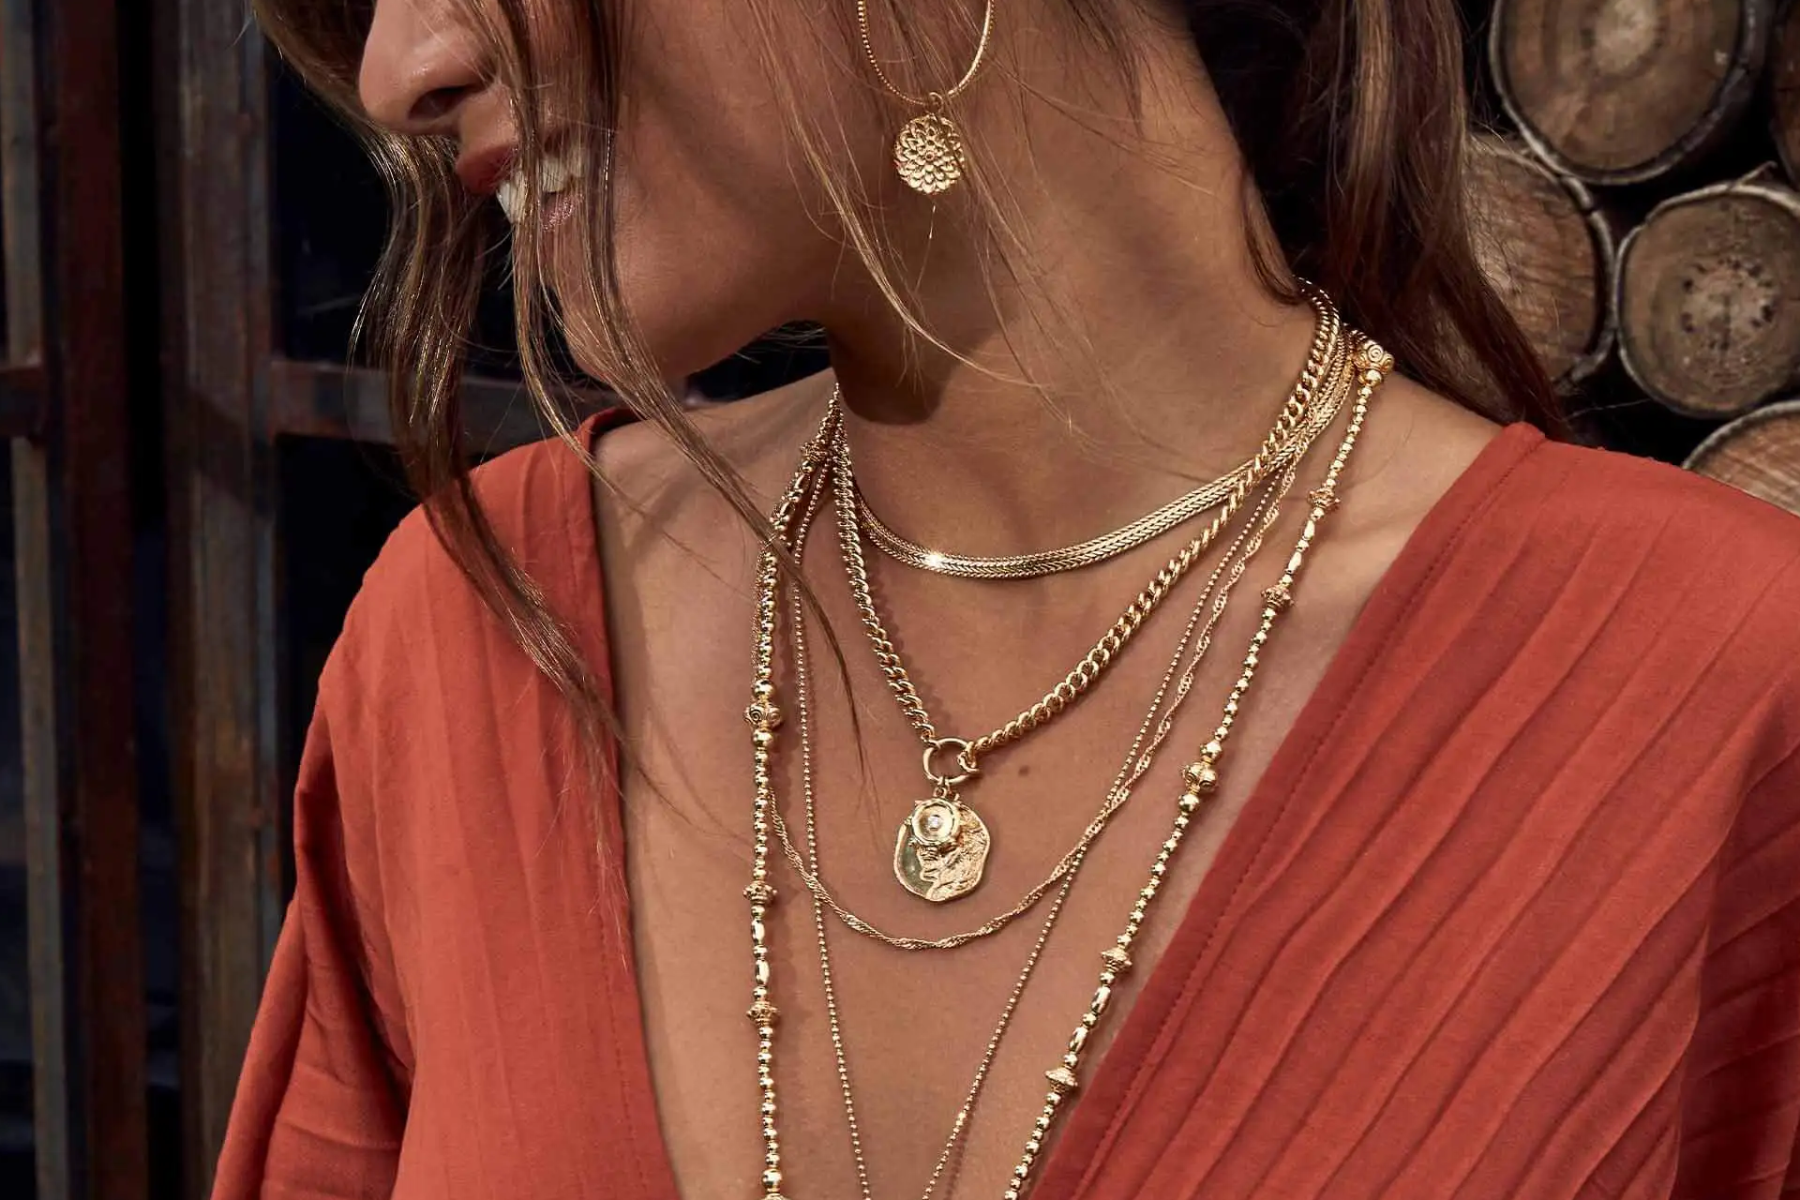 A woman wearing layered necklaces